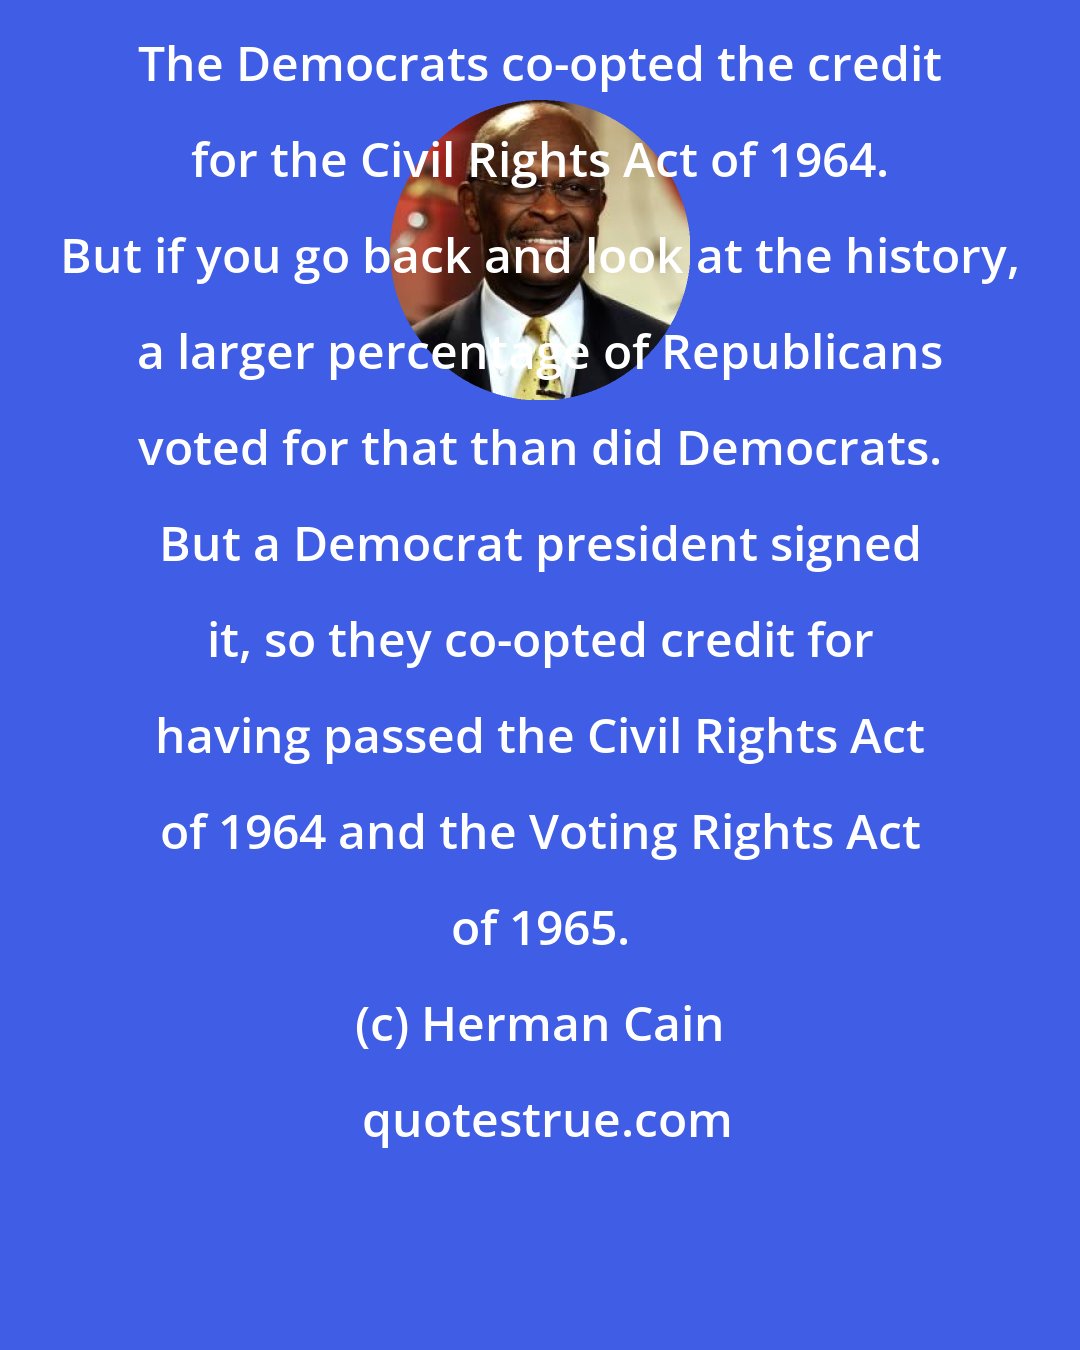 Herman Cain: The Democrats co-opted the credit for the Civil Rights Act of 1964. But if you go back and look at the history, a larger percentage of Republicans voted for that than did Democrats. But a Democrat president signed it, so they co-opted credit for having passed the Civil Rights Act of 1964 and the Voting Rights Act of 1965.